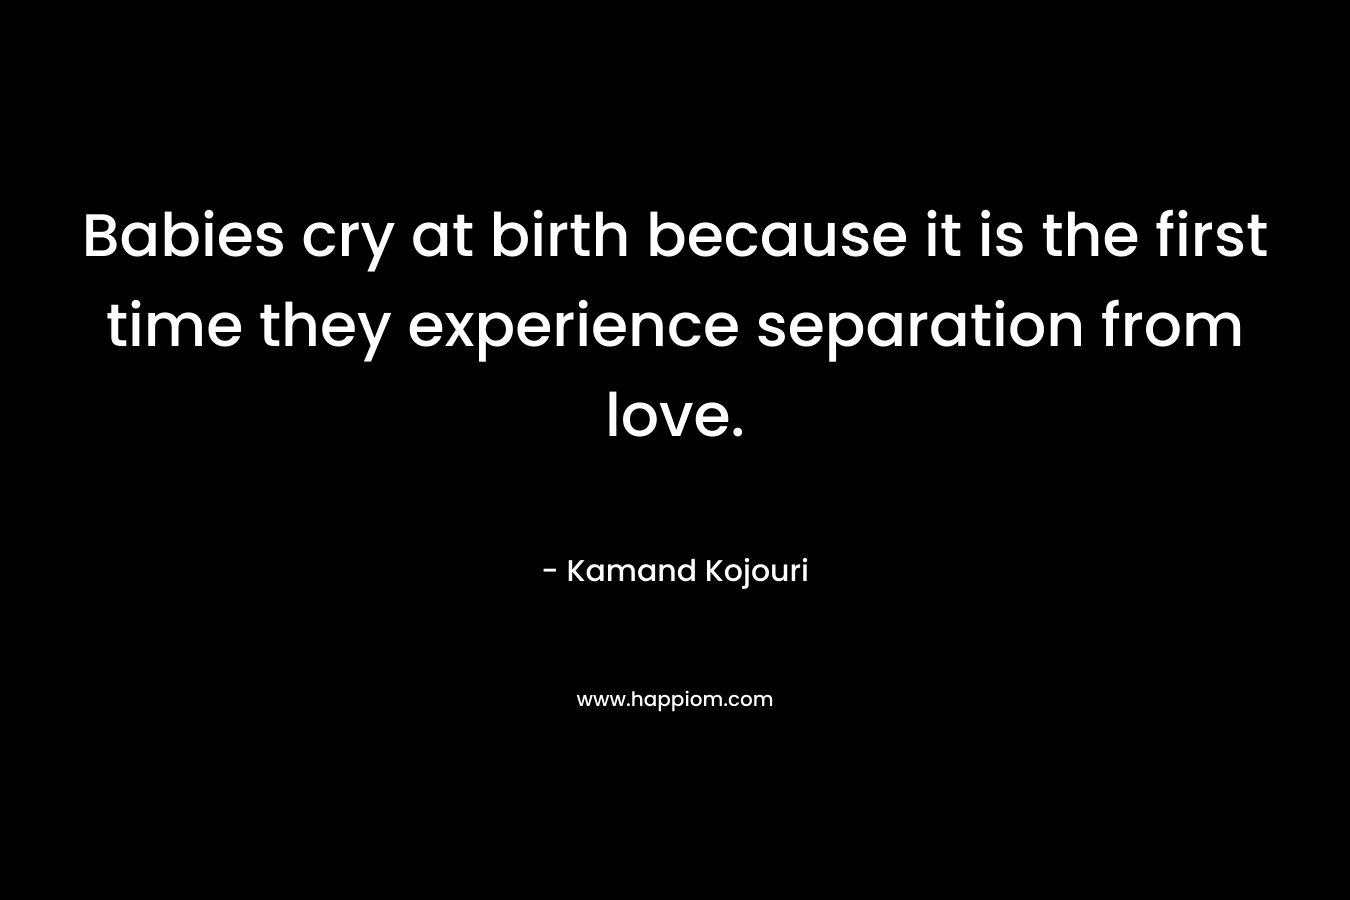 Babies cry at birth because it is the first time they experience separation from love.